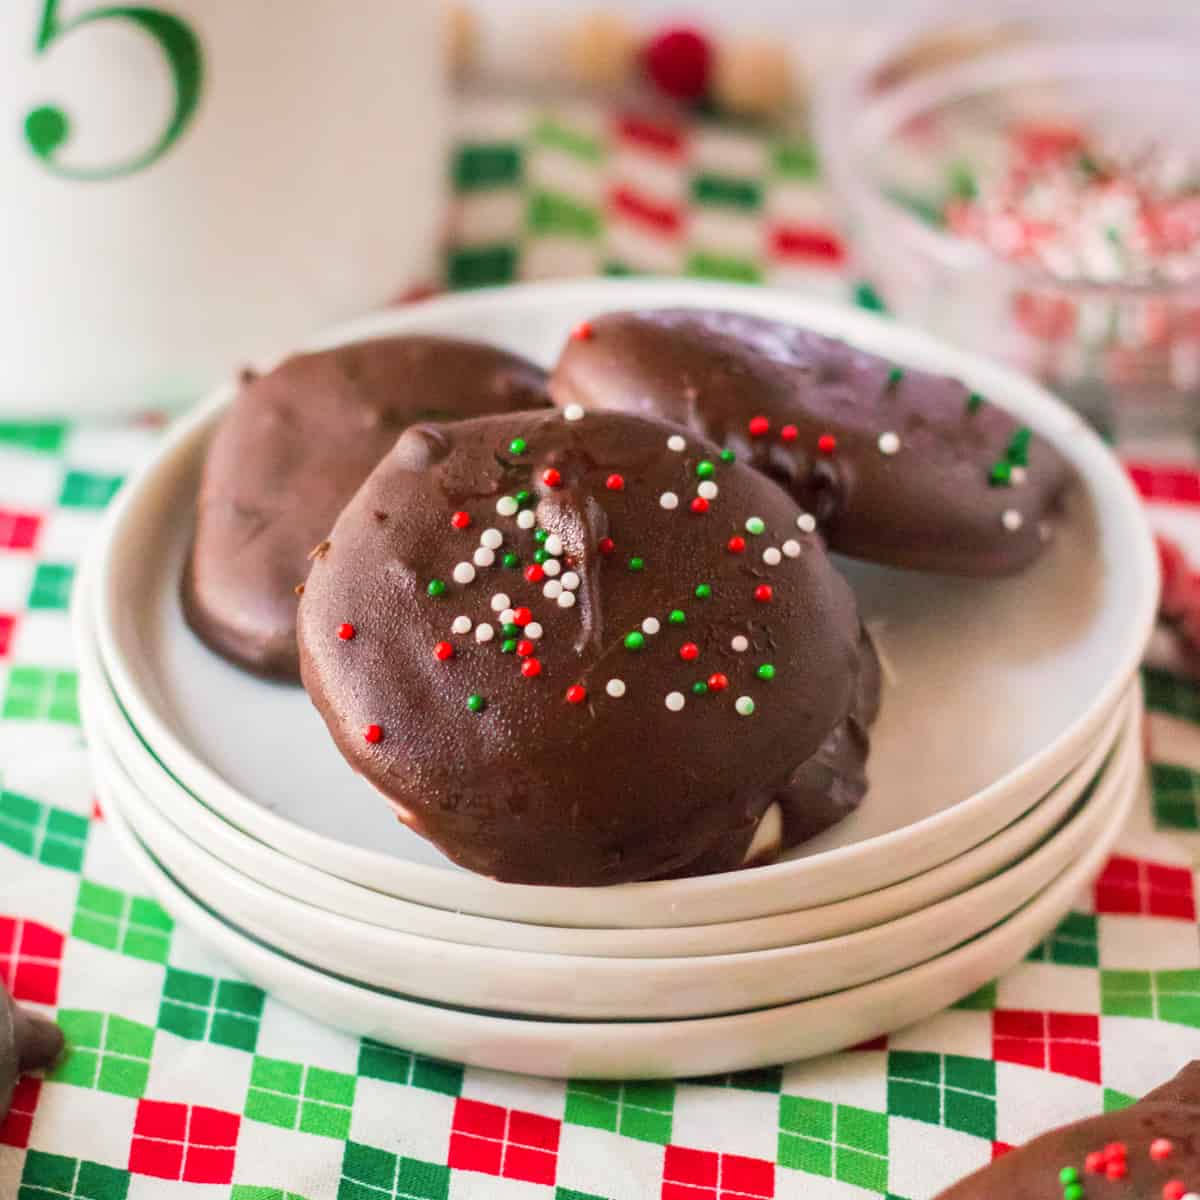 Homemade peppermint patties with Christmas sprinkles.